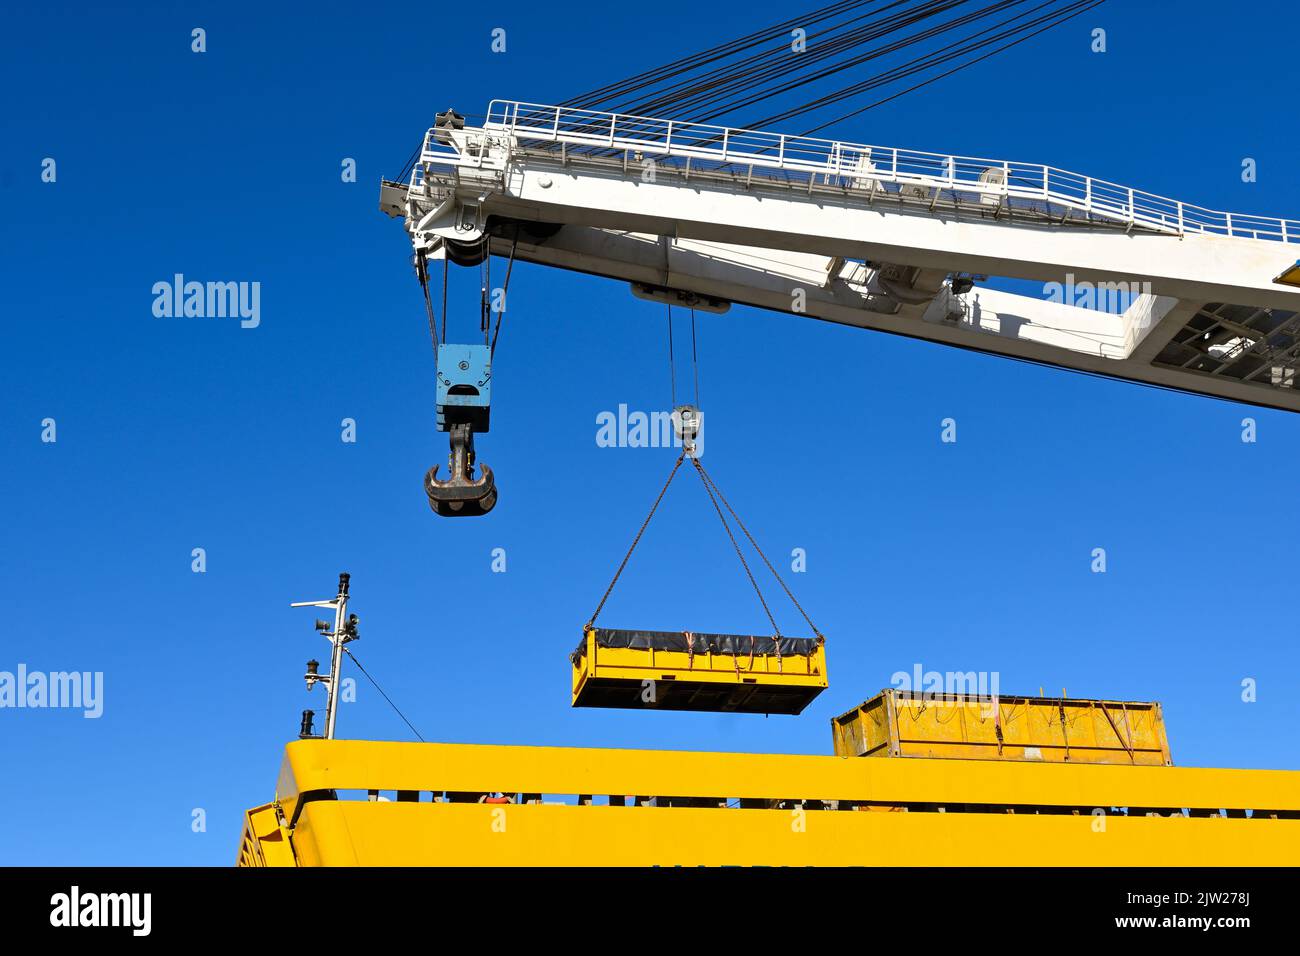 Yellow outdoor crane used in ship industry, electric overhead traveling crane above the vessel Stock Photo